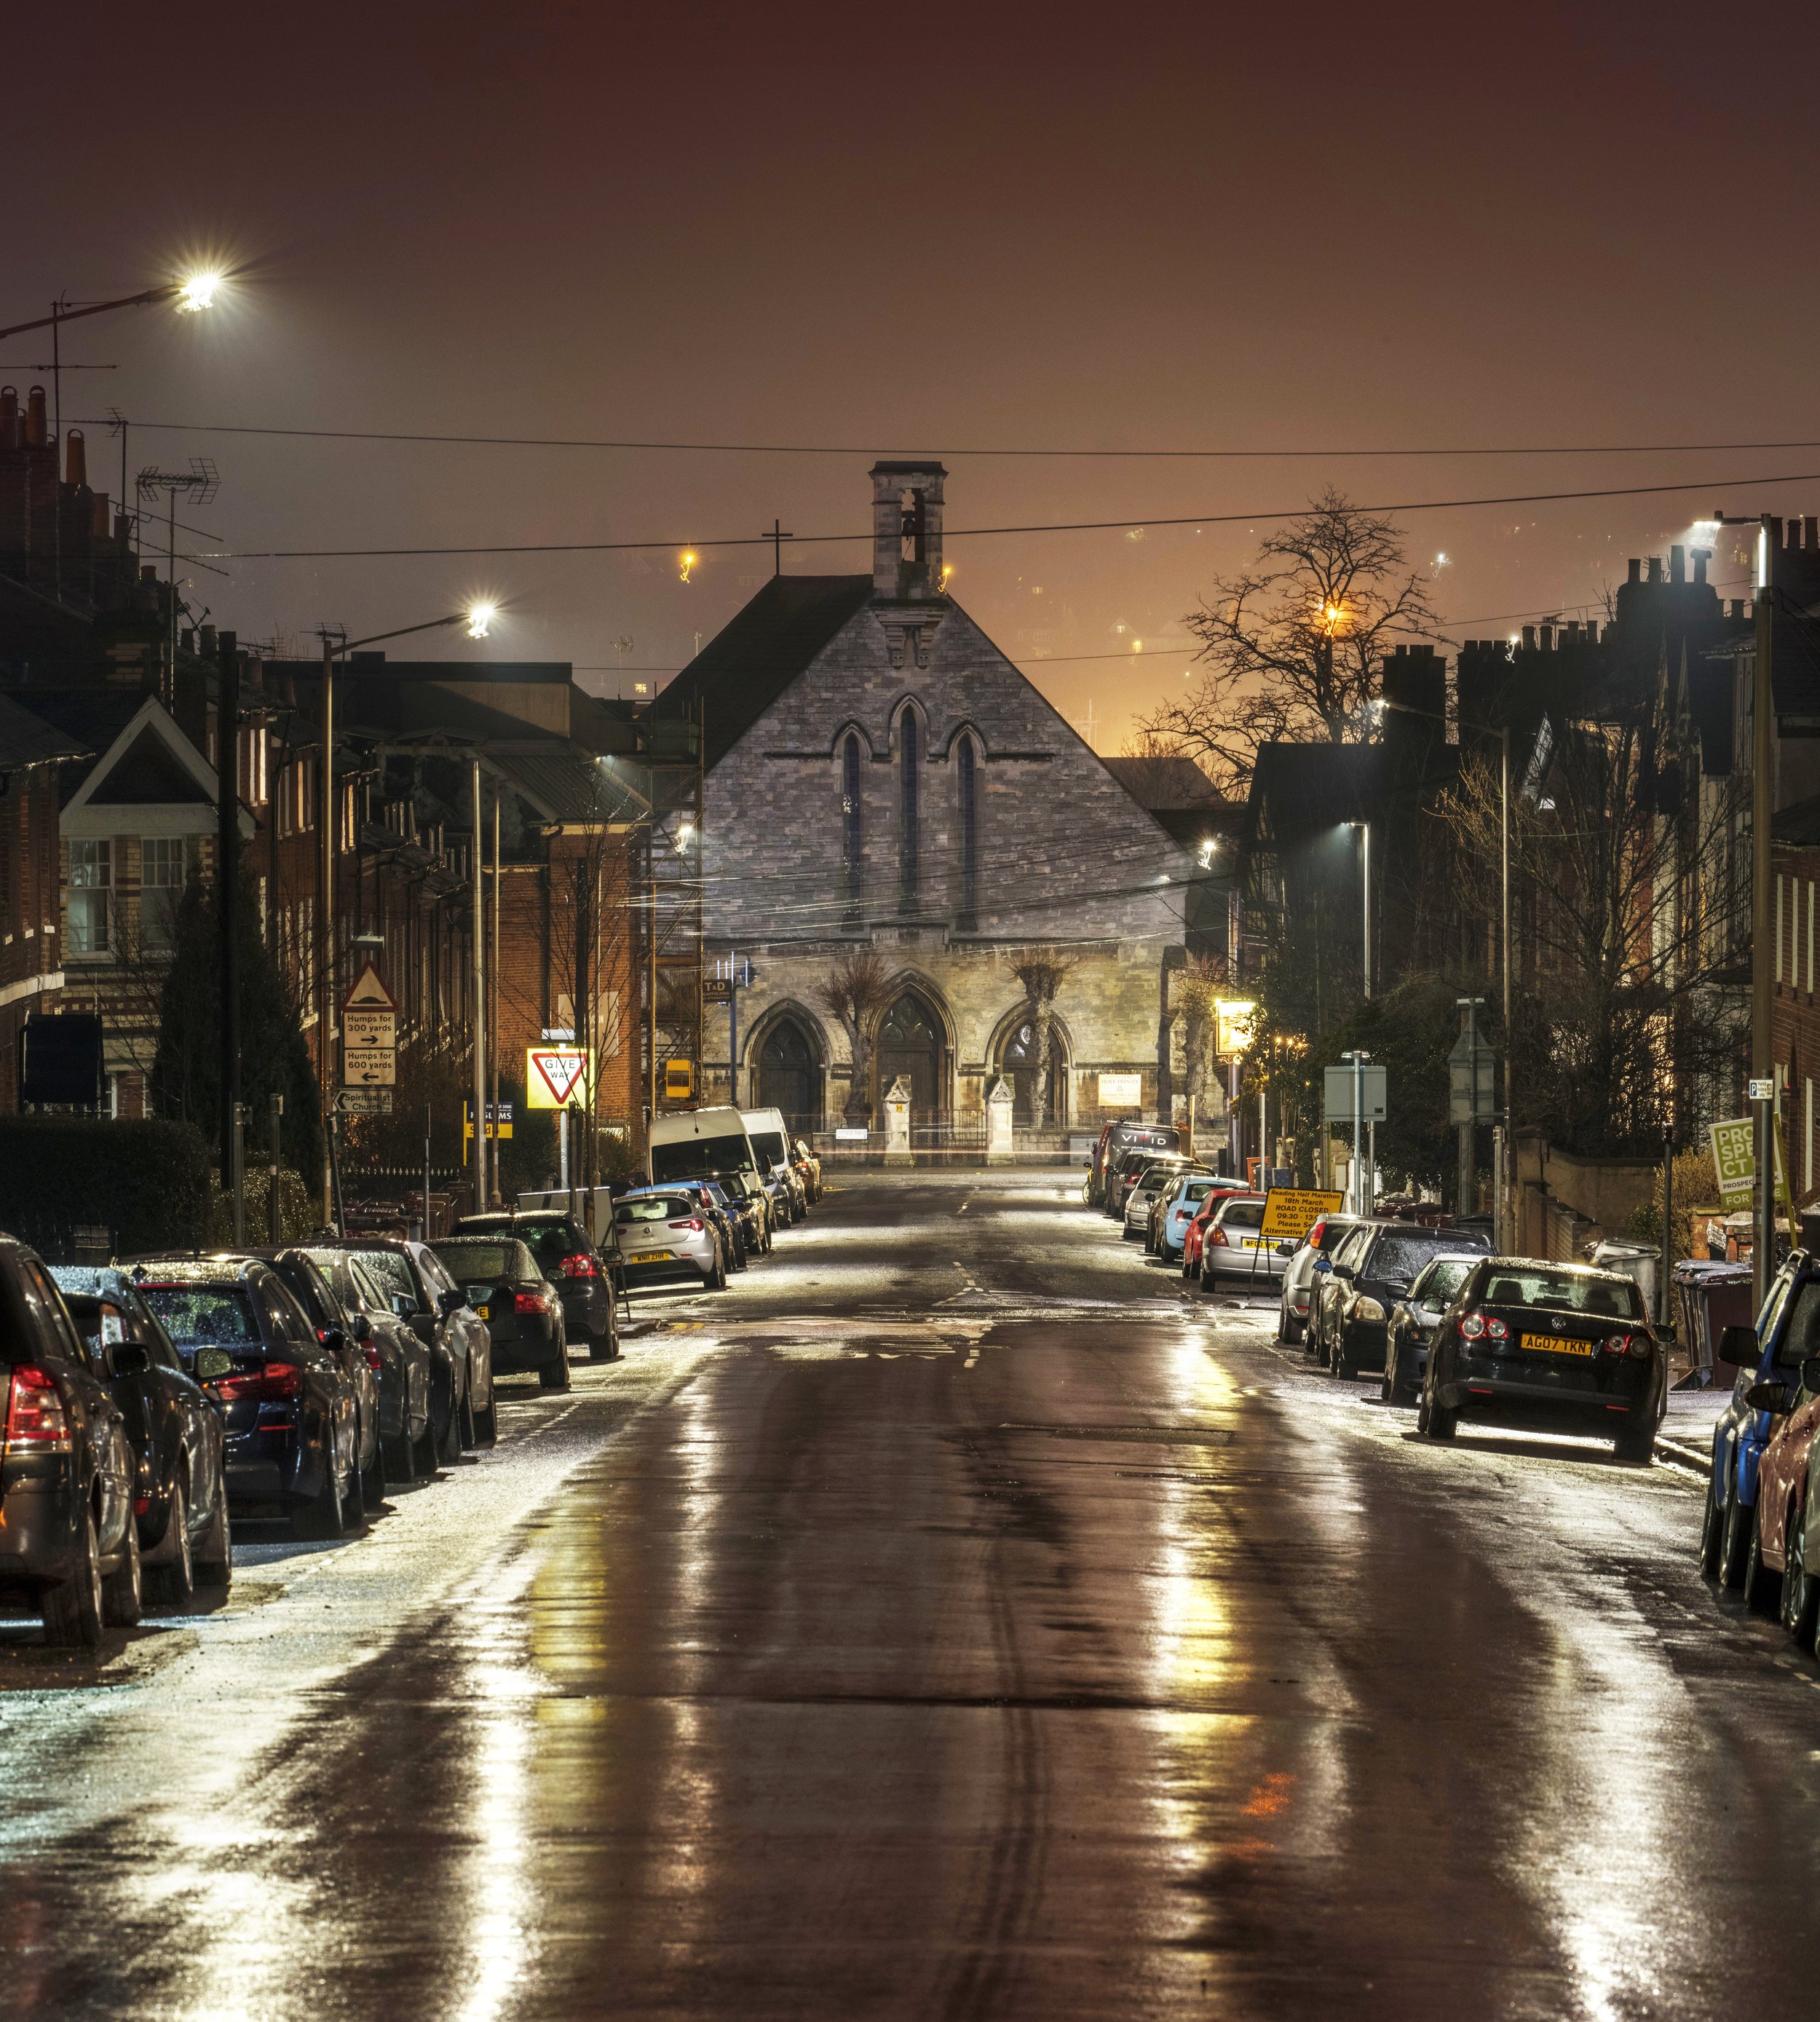 Russell Street on a wet night